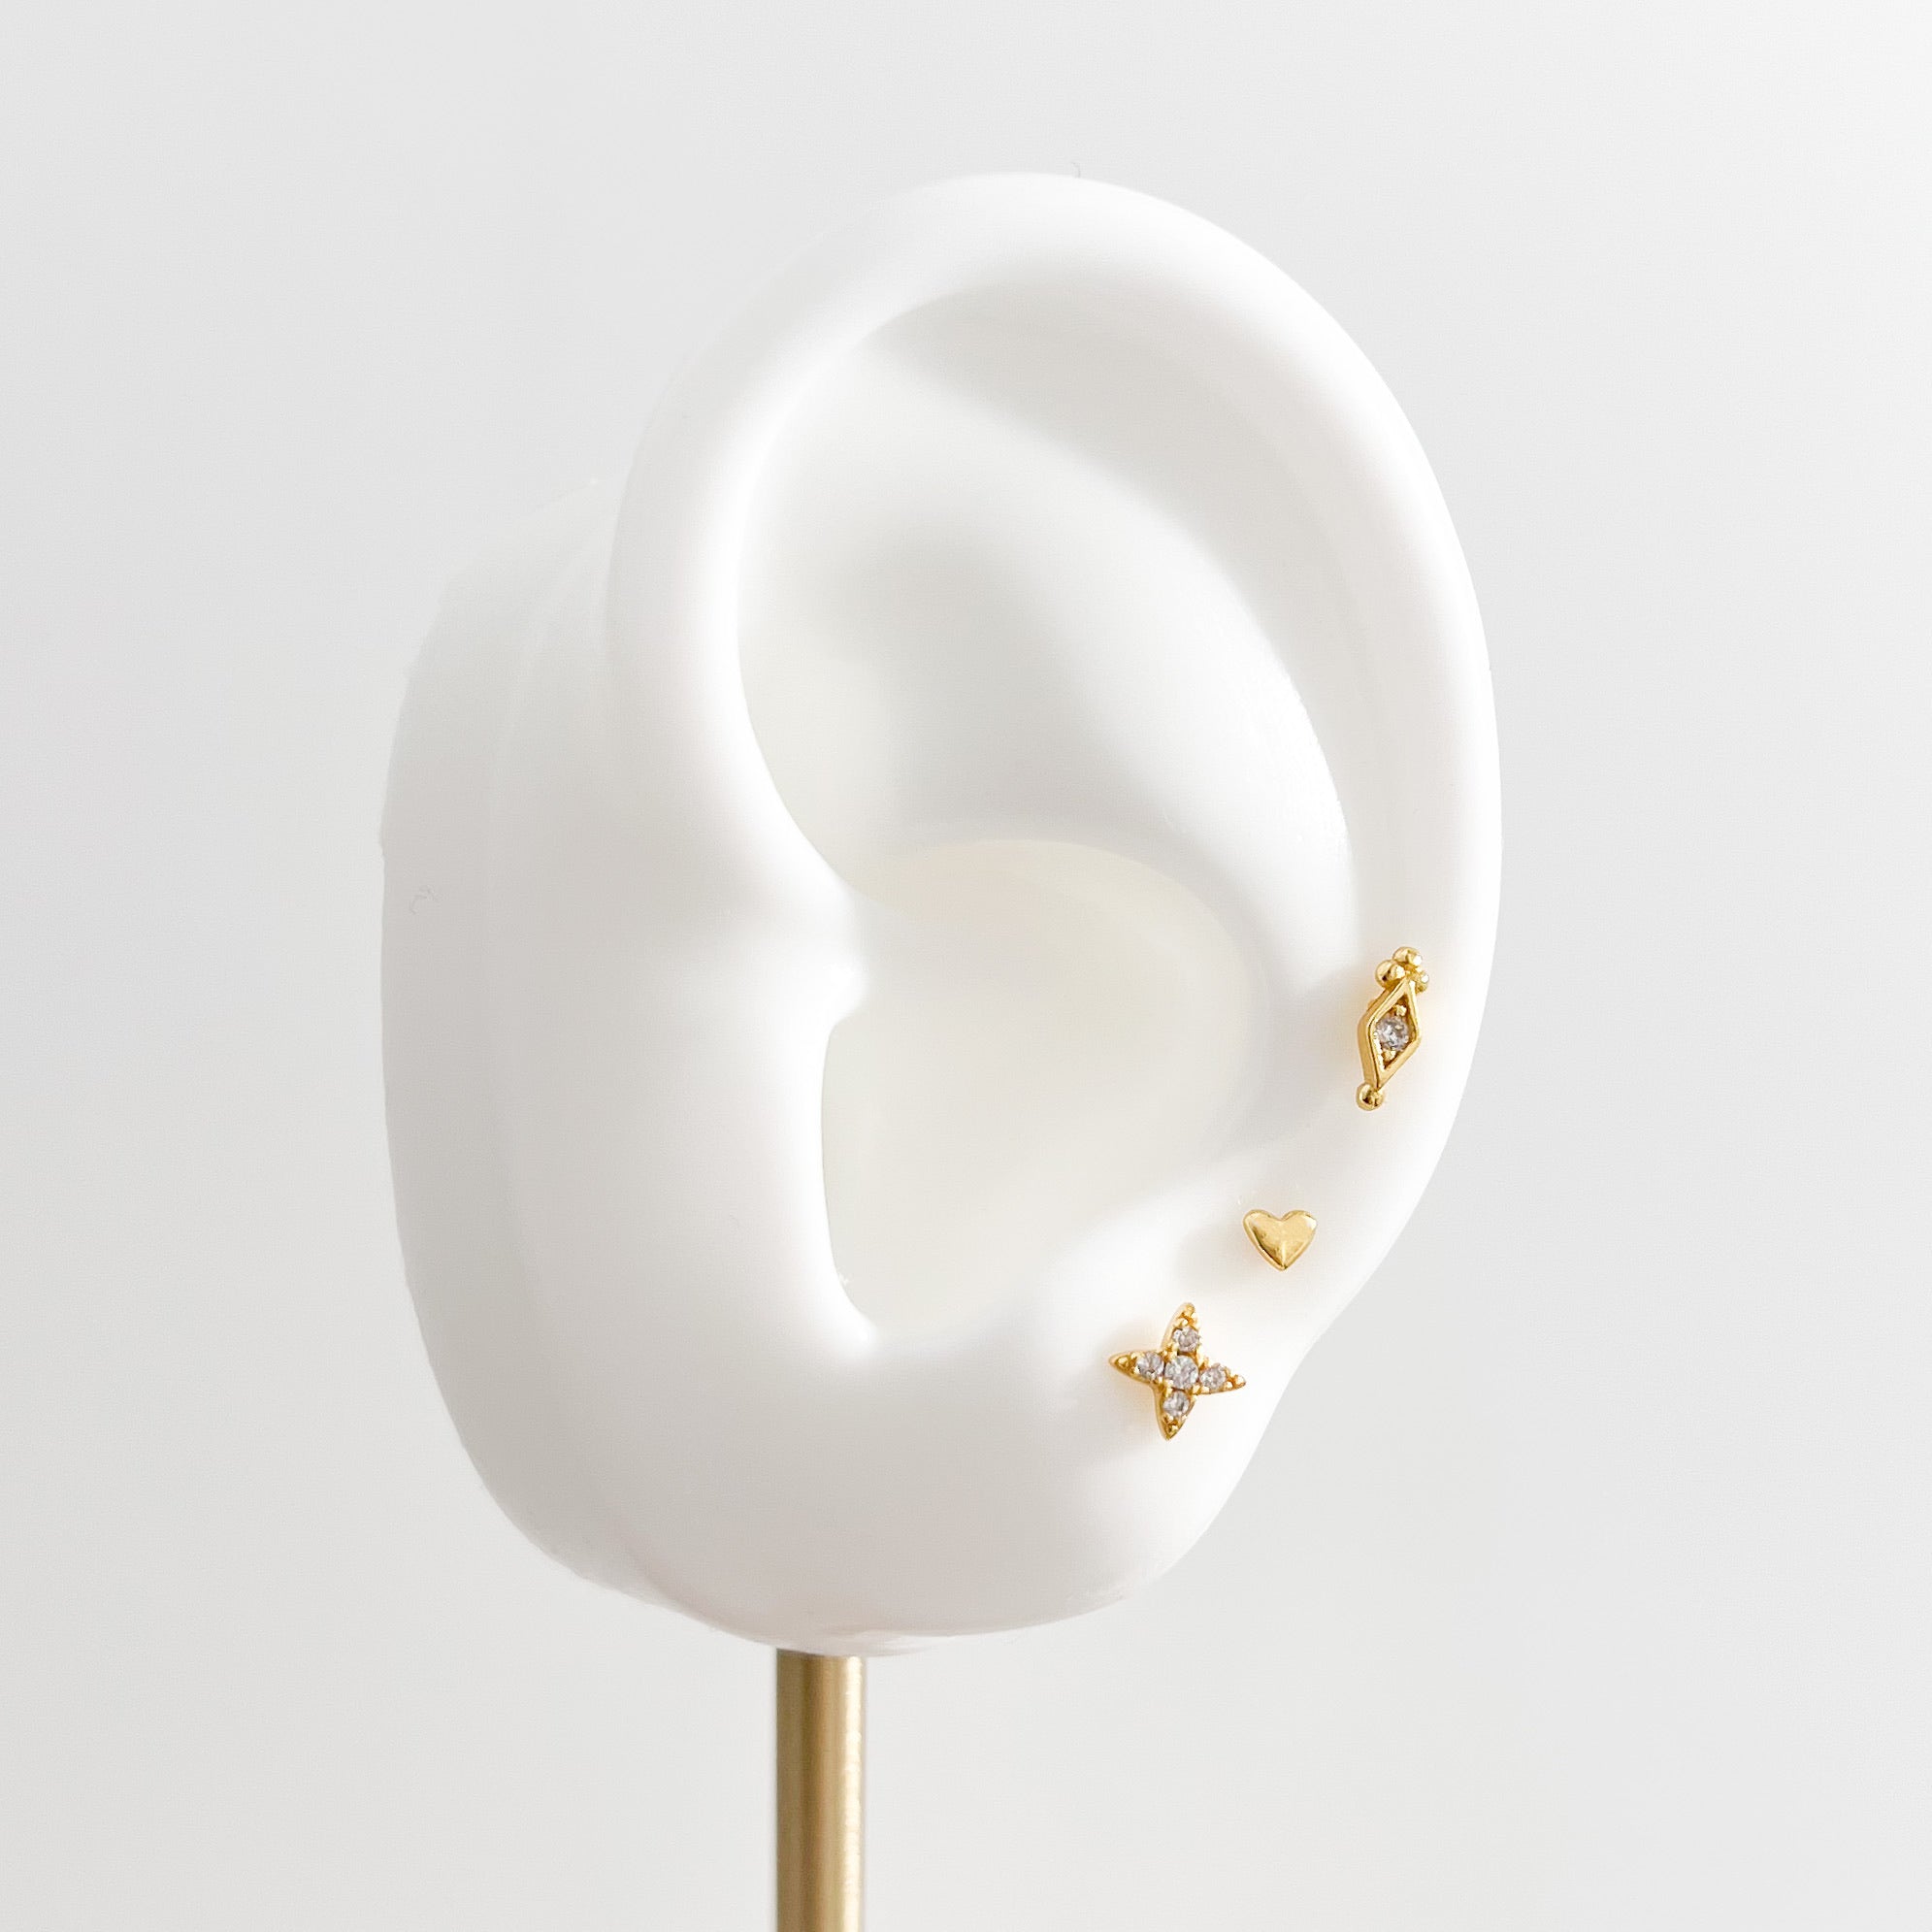 Clear Gem Estrella Studs in Gold - Flaire & Co.